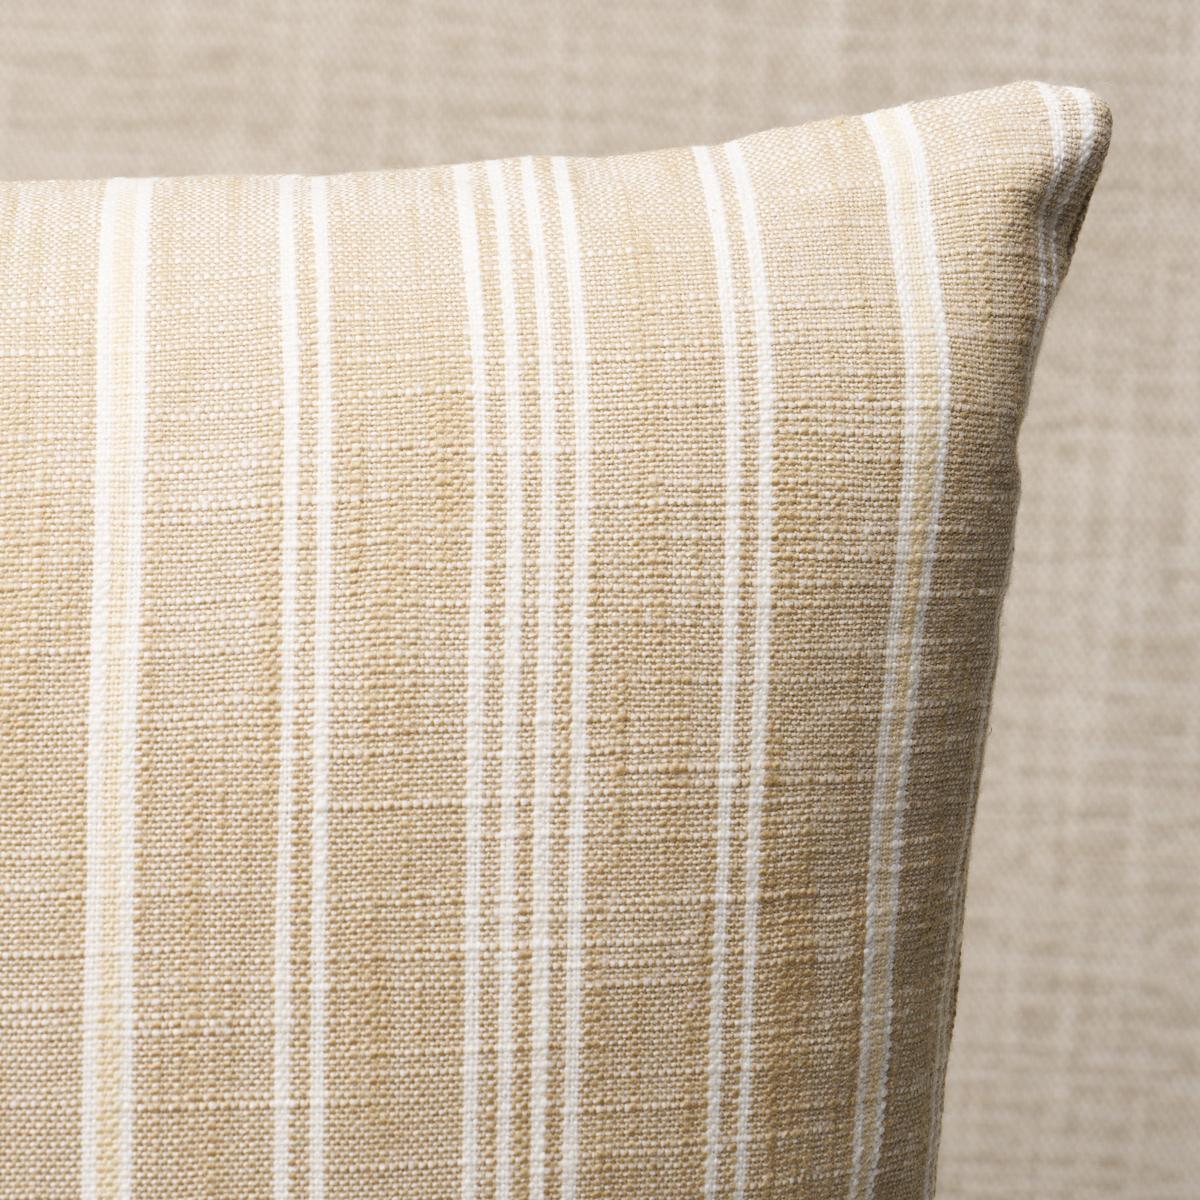 This pillow features Lucy Stripe by Mark D. Sikes with a knife edge finish. Mark D. Sikes had style and versatility in mind when he created Lucy Stripe, an updated version of a traditional batik stripe. Pillow includes a feather/down fill insert and